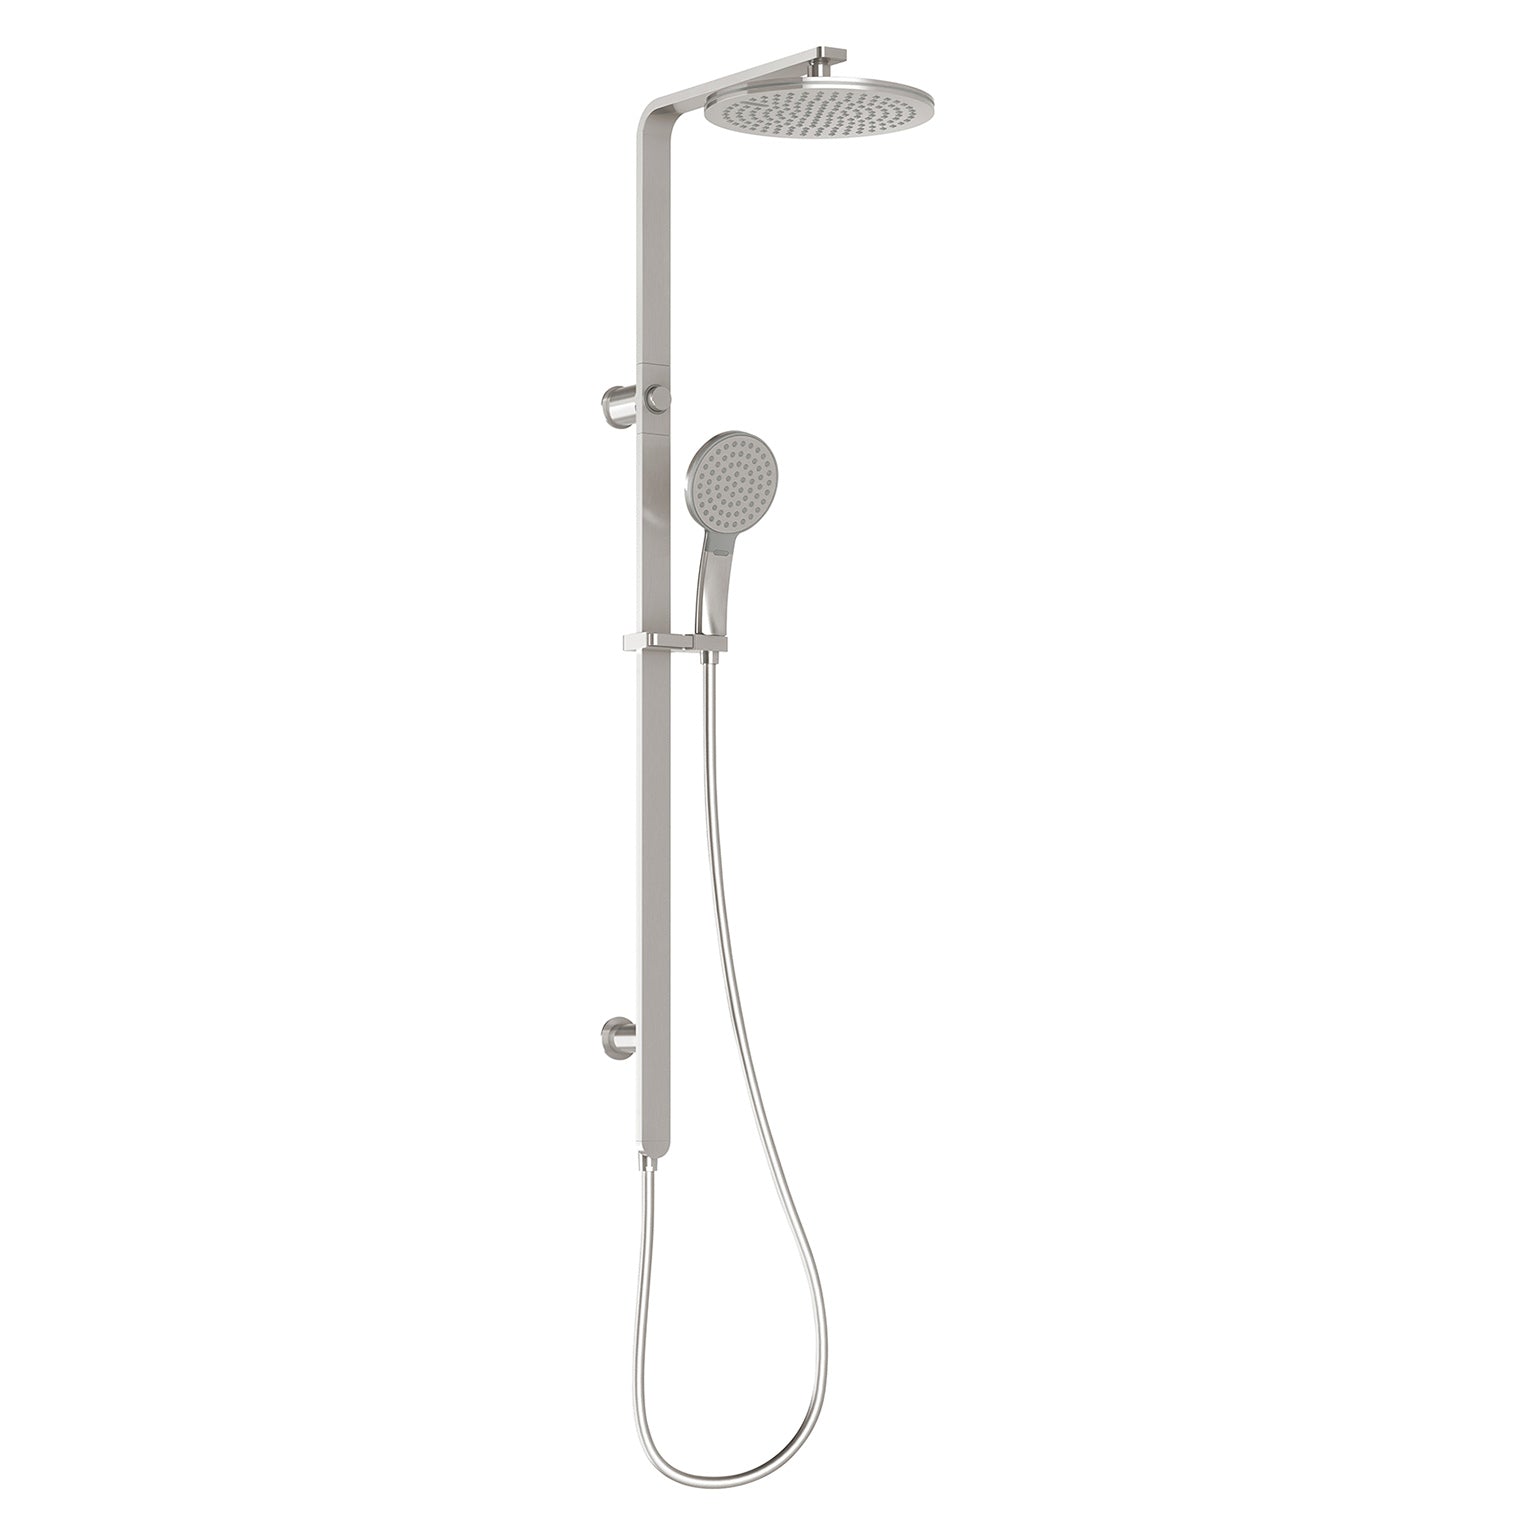 PHOENIX NX QUIL TWIN SHOWER BRUSHED NICKEL